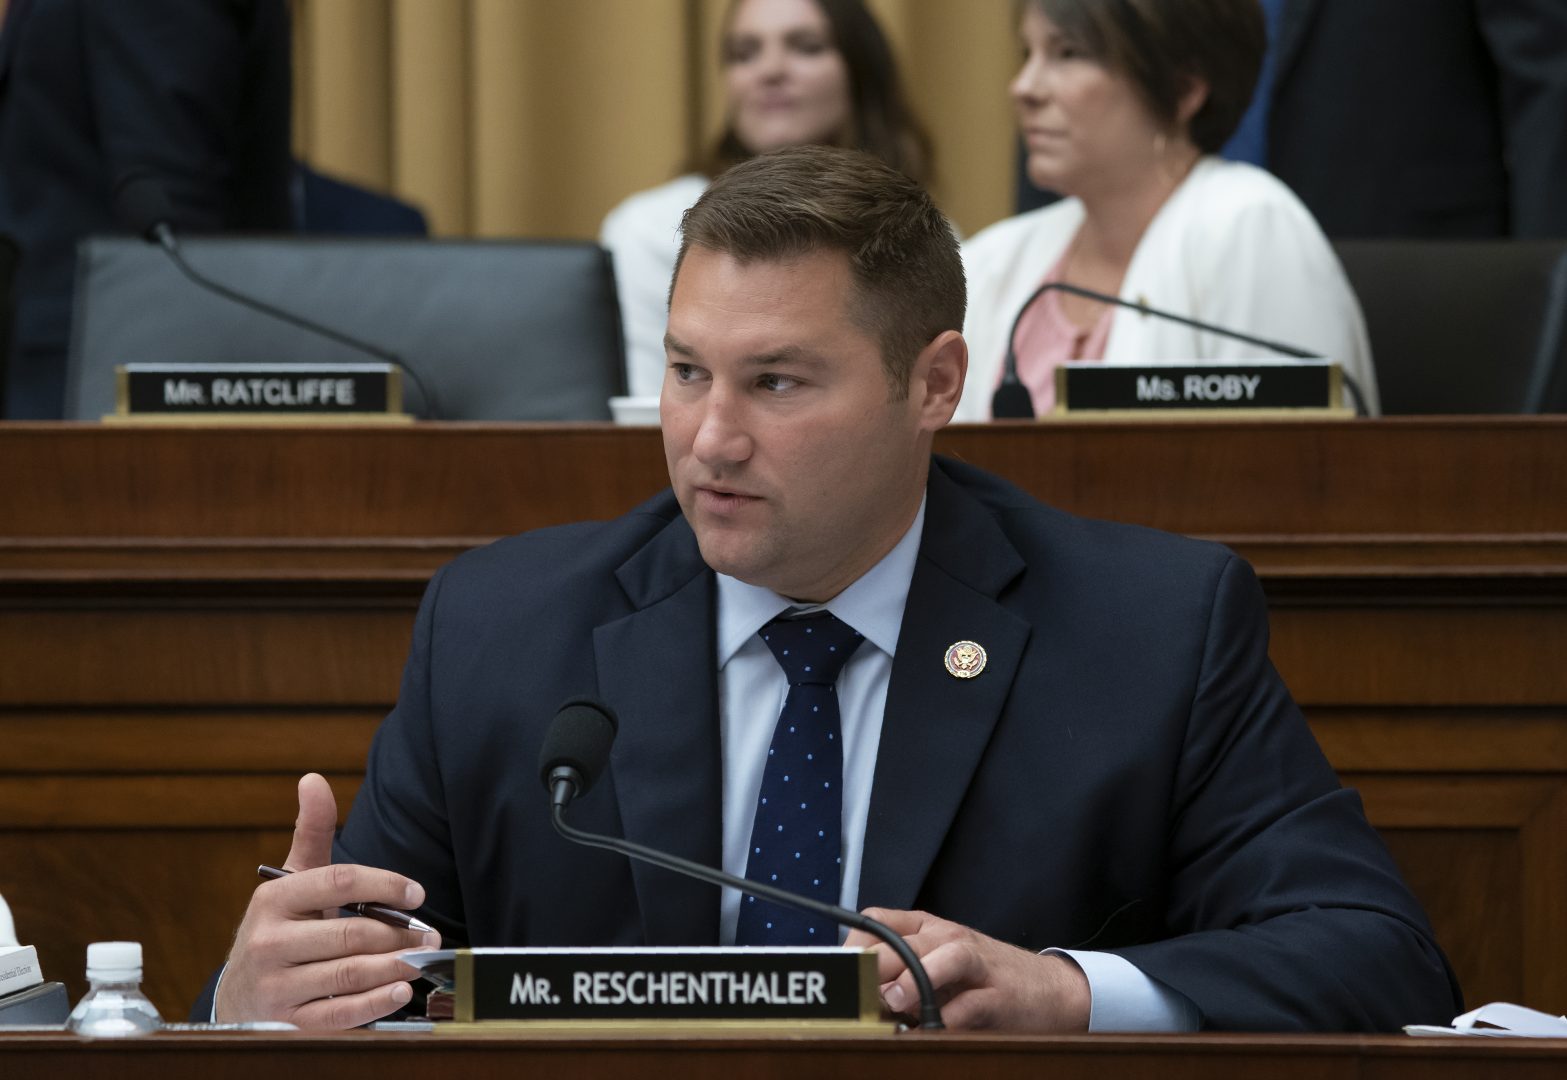 FILE PHOTO: Rep. Guy Reschenthaler, R-Pa., speaks during a House Judiciary Committee session on Capitol Hill in Washington, July 24, 2019.